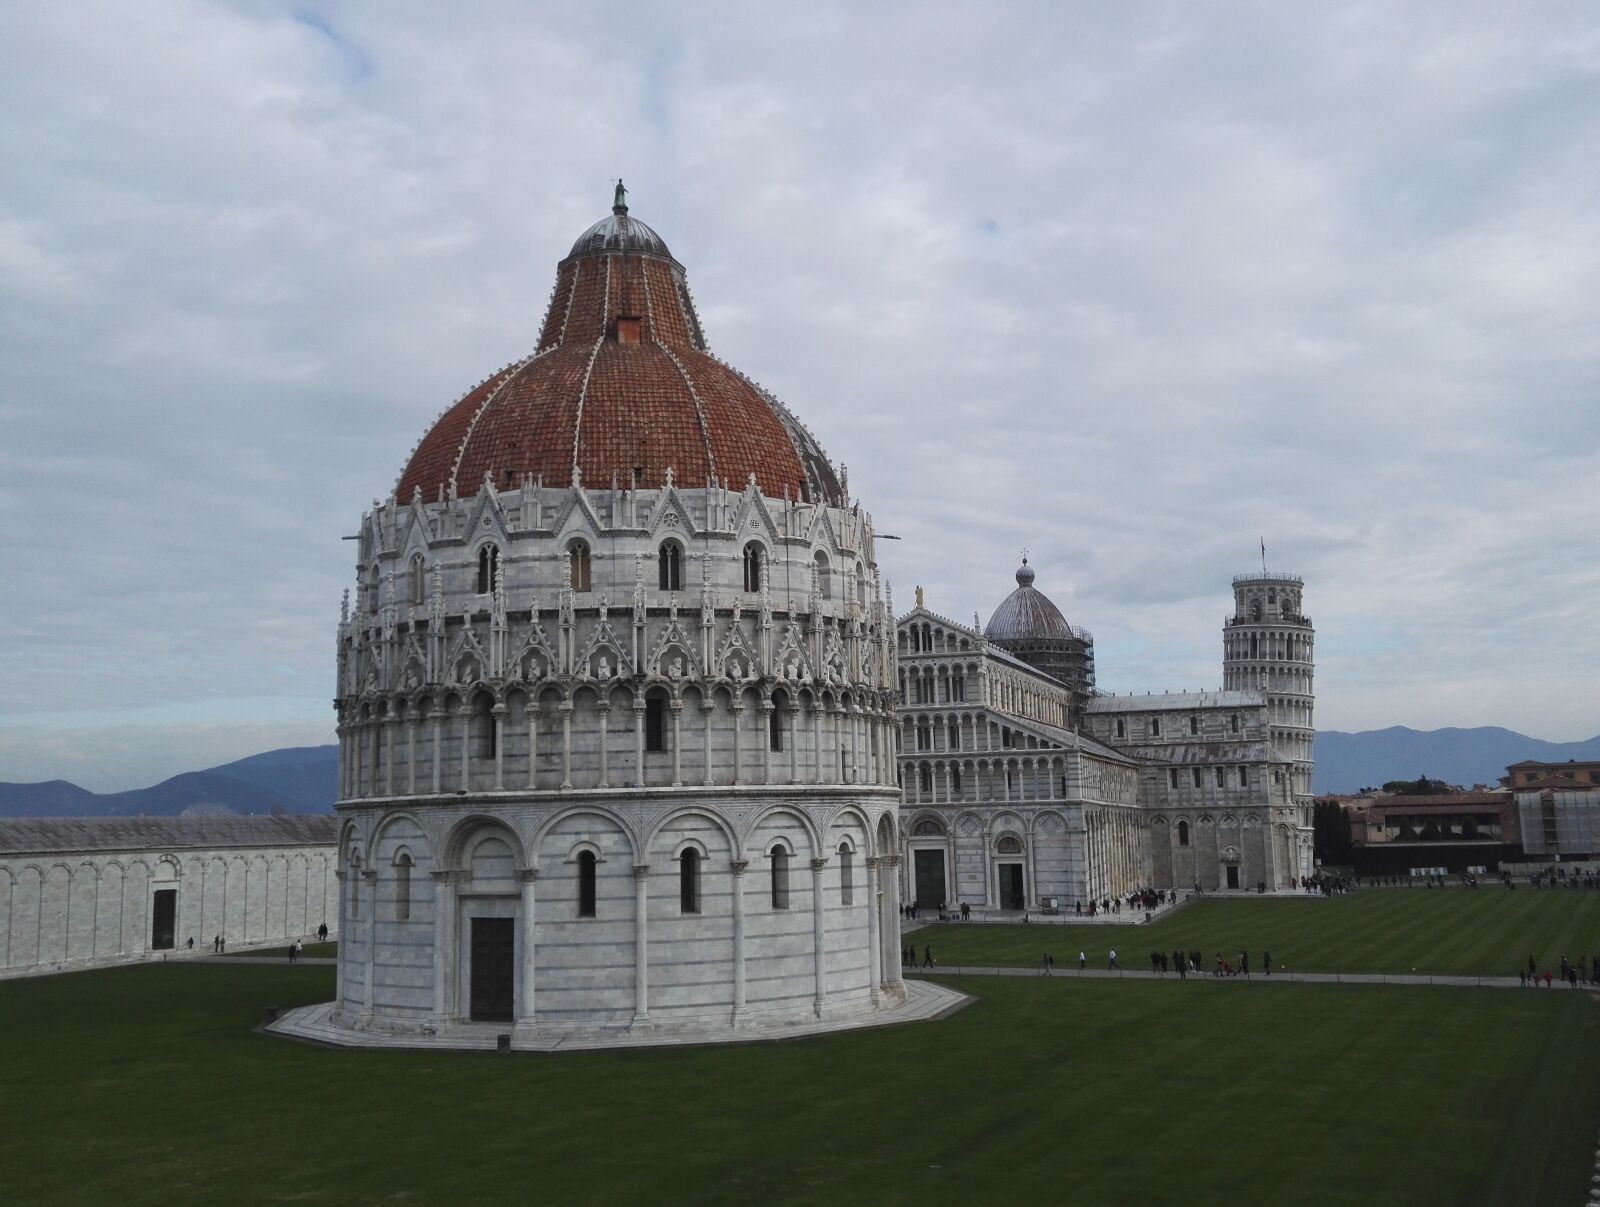 HUAWEI Honor 7 sample photo. Pisa, tower, italy photography